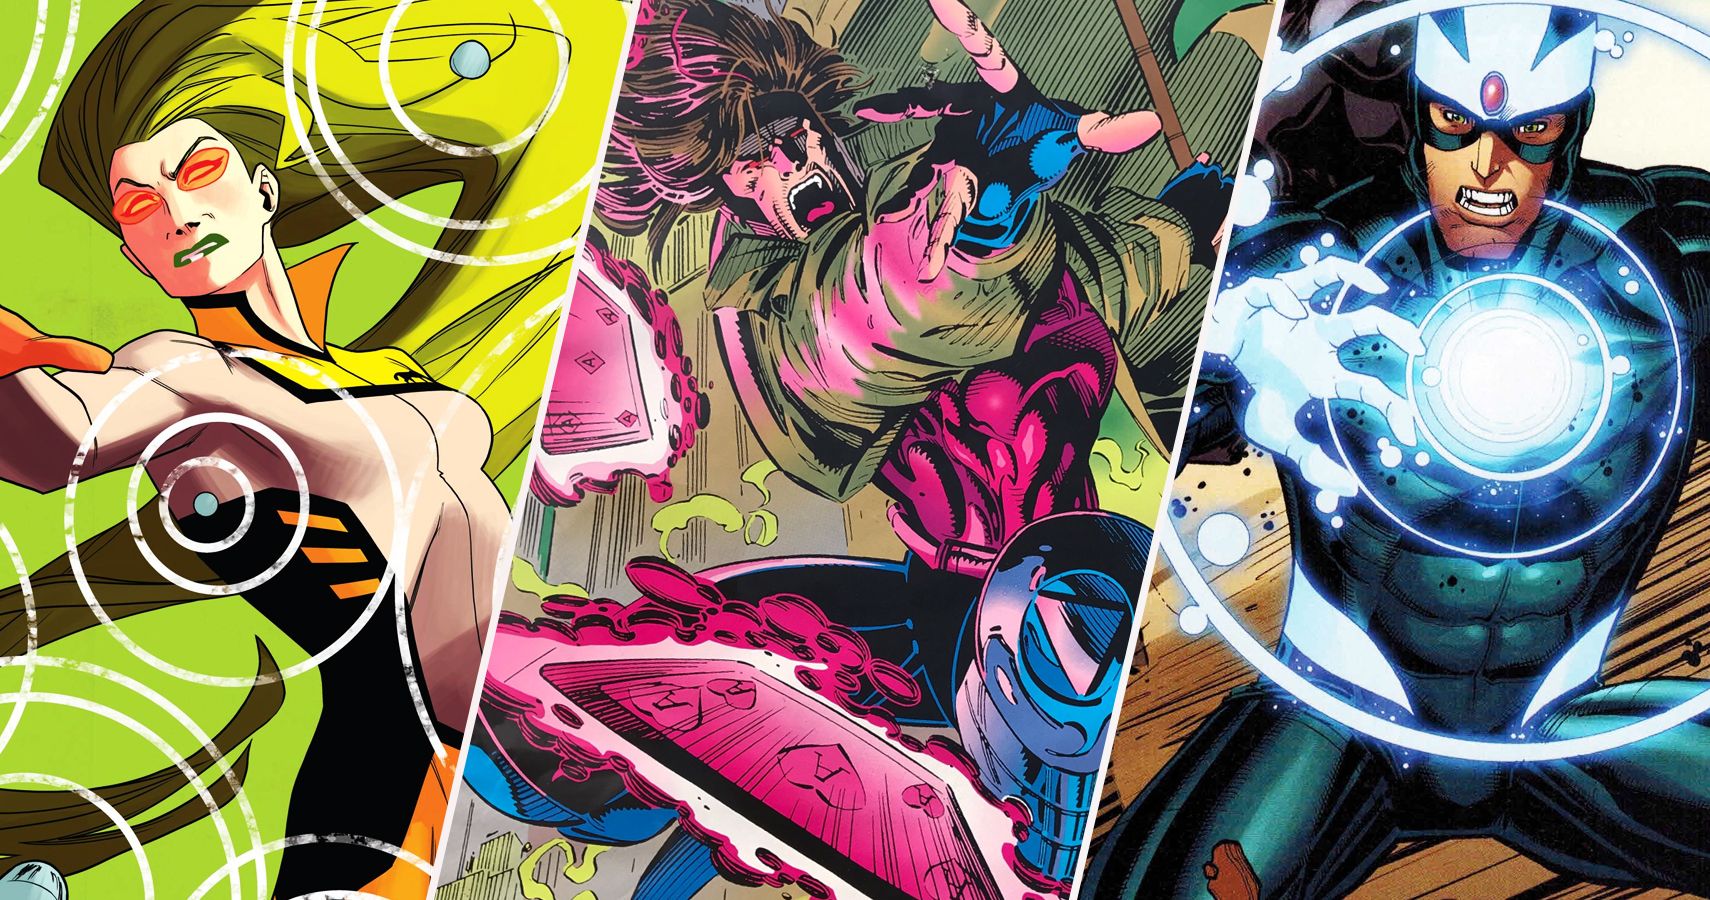 Is Gambit an omega level mutant? - Quora